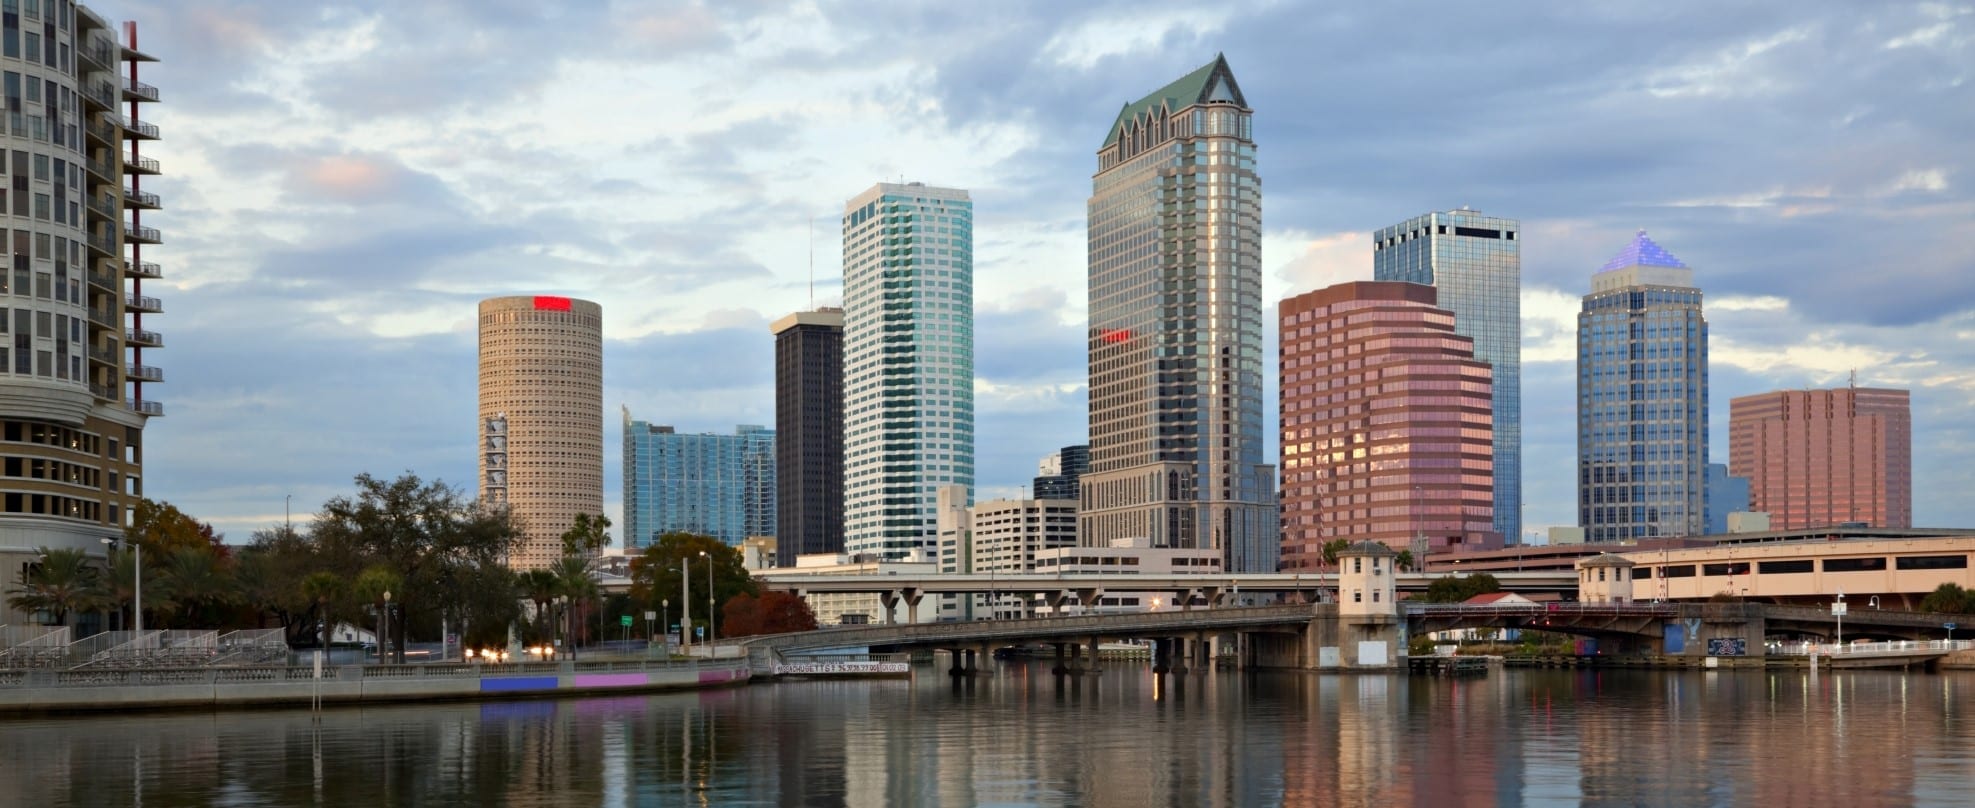 Affordable SEO Company - Tampa office - SEO service for small business